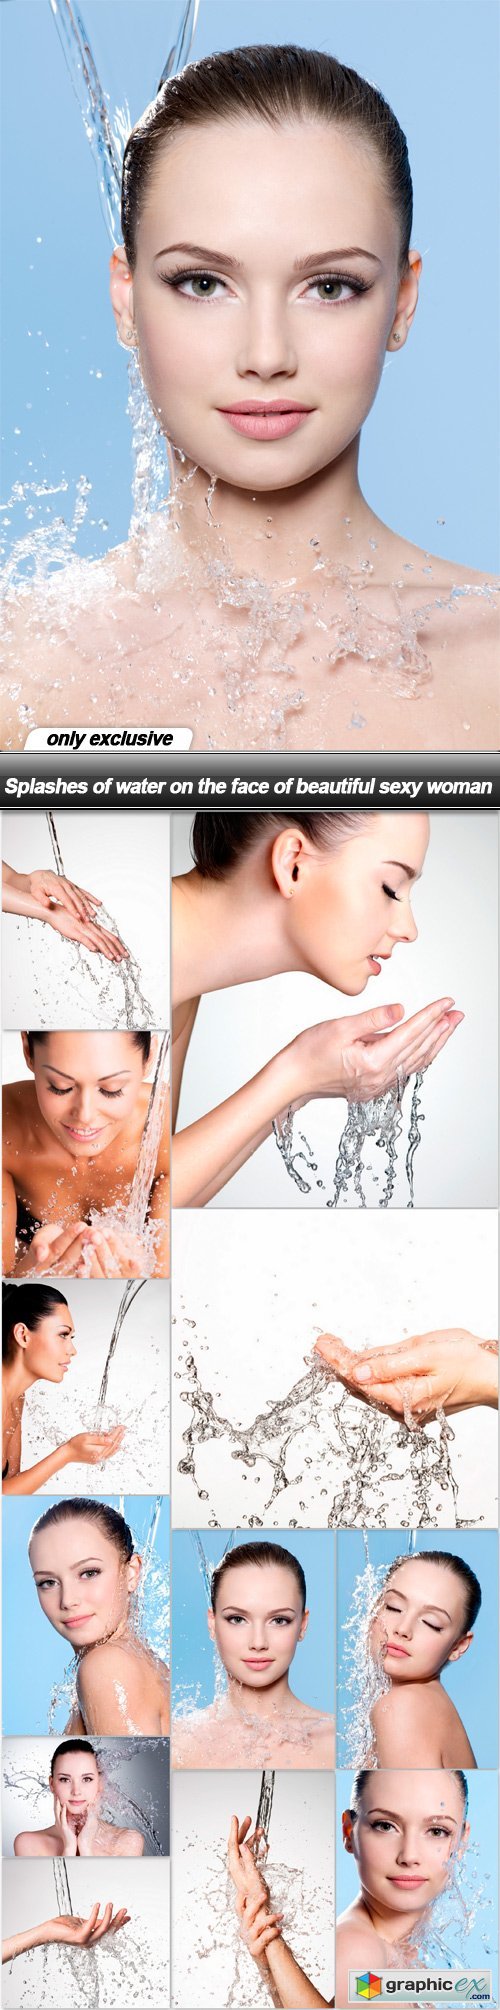 Splashes of water on the face of beautiful sexy woman - 12 UHQ JPEG